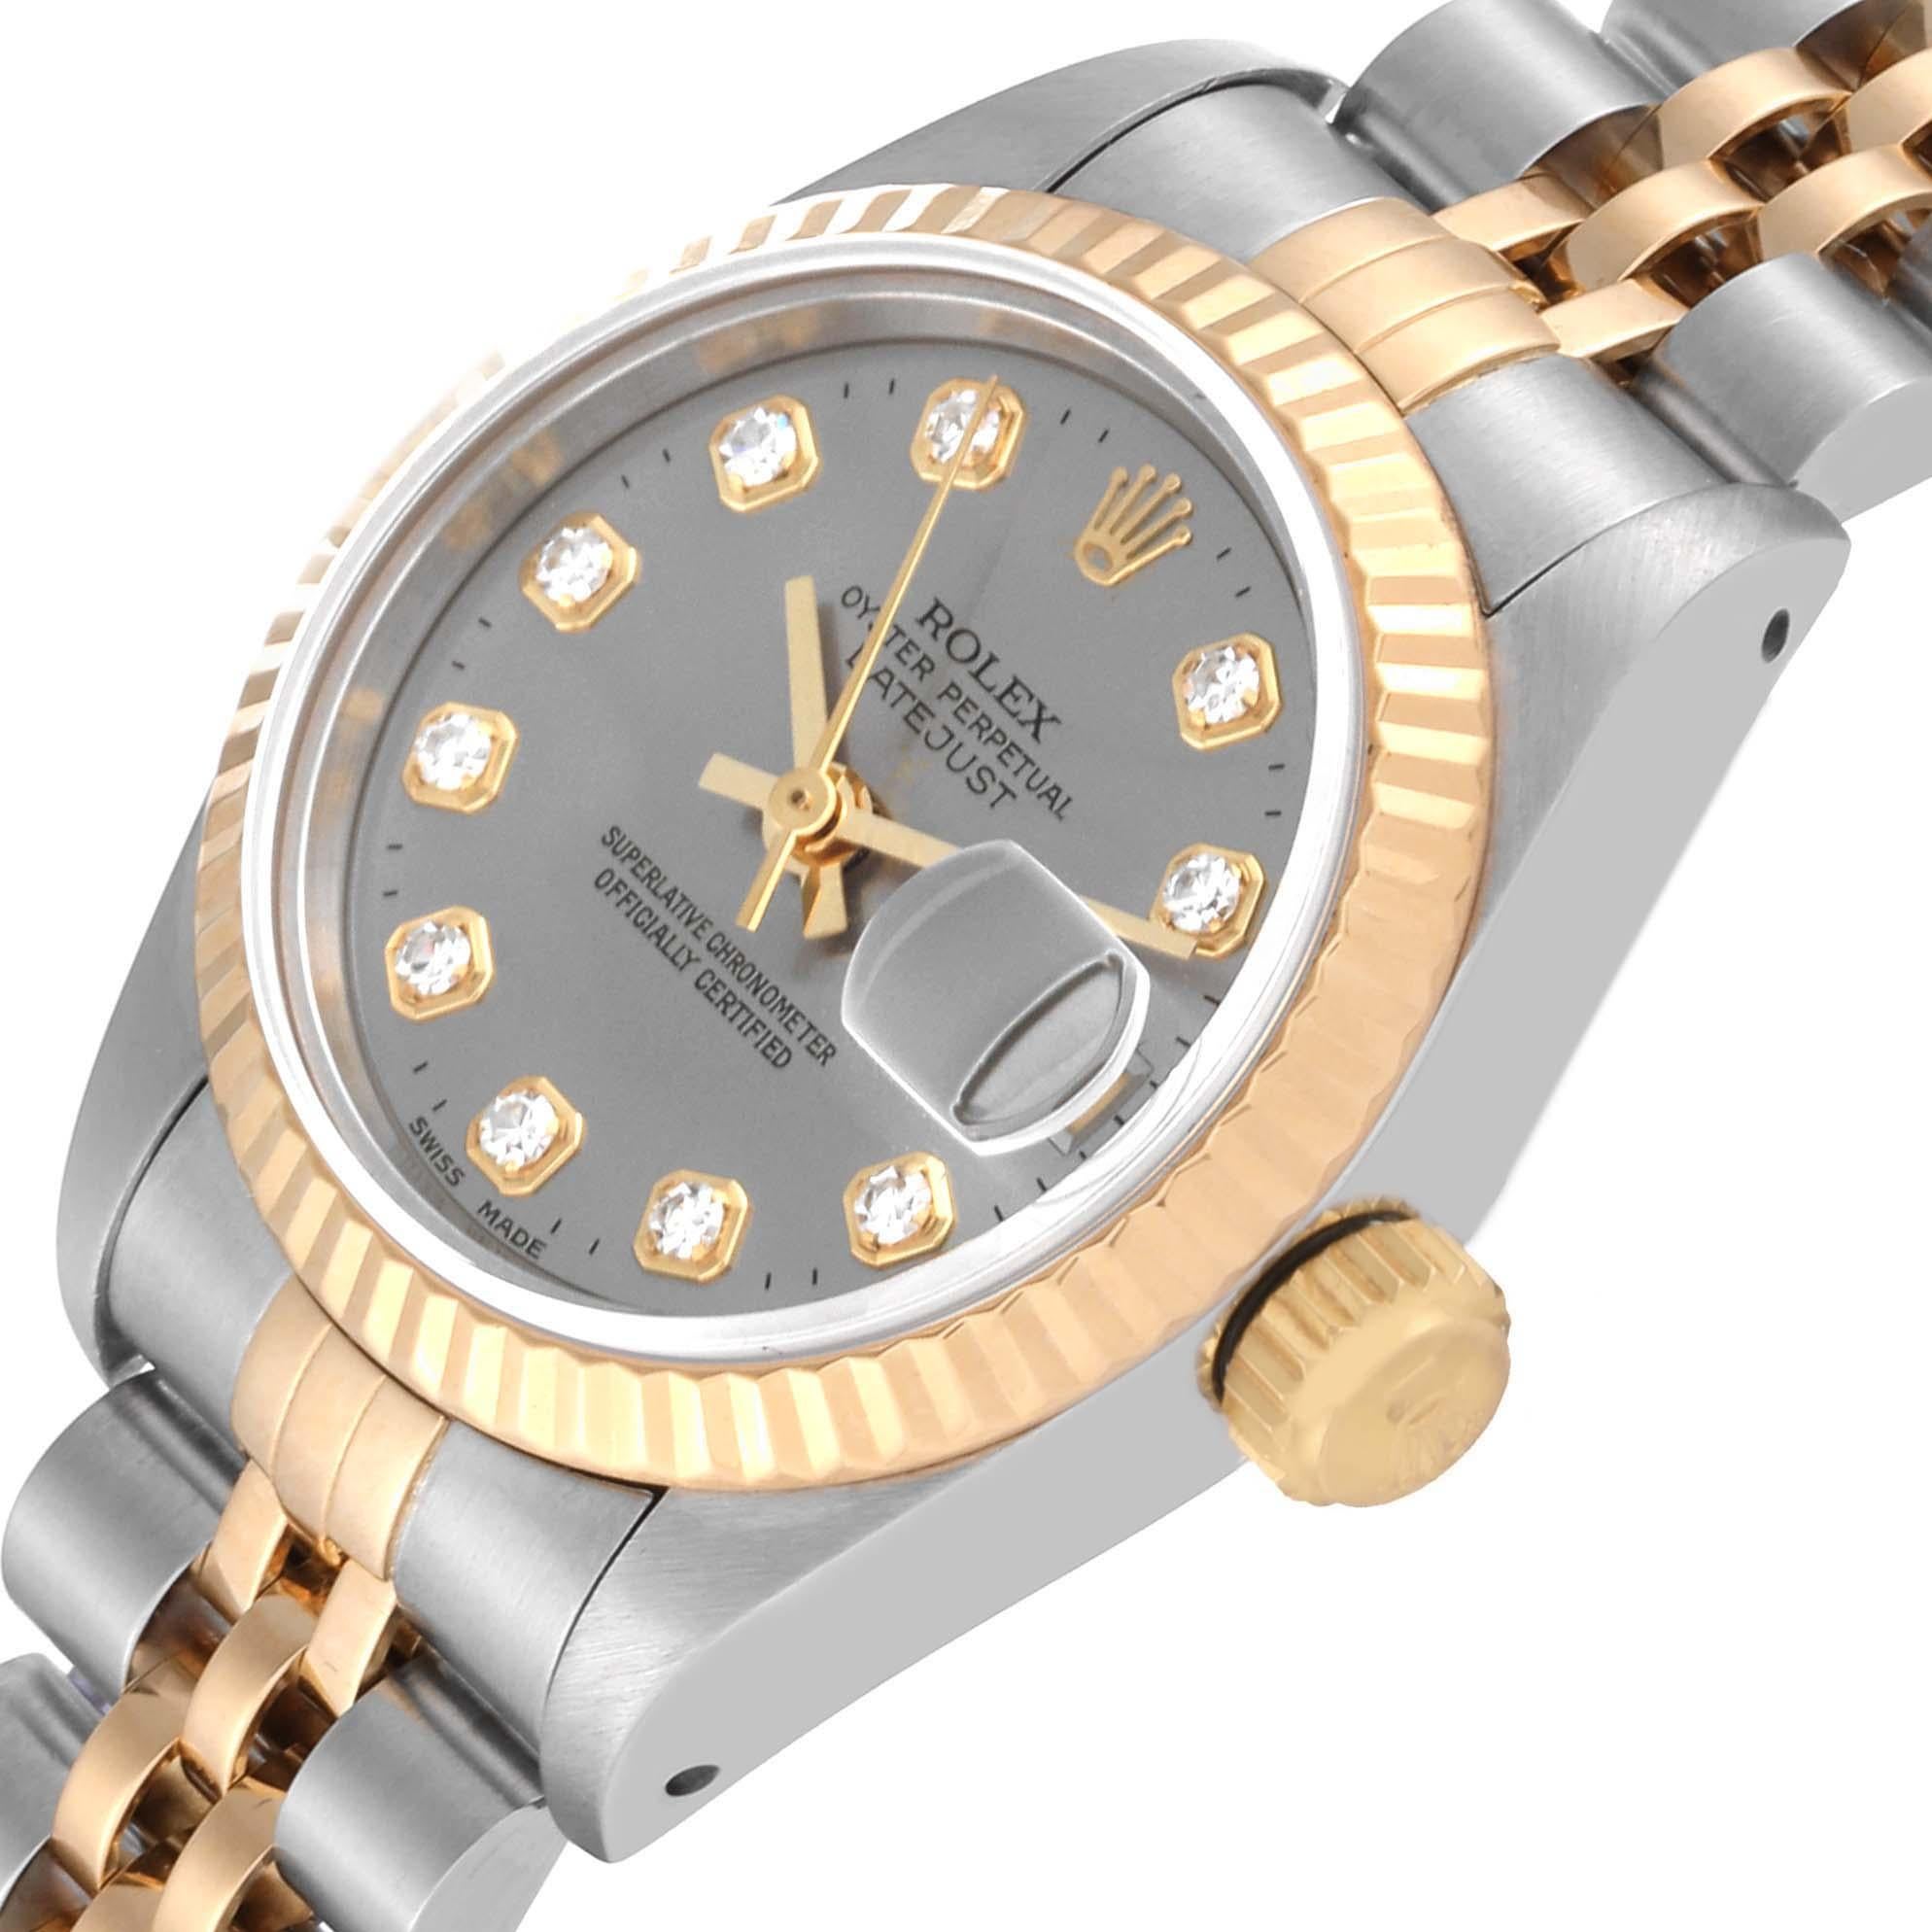 Rolex Datejust Slate Diamond Dial Steel Yellow Gold Ladies Watch 69173. Officially certified chronometer automatic self-winding movement. Stainless steel oyster case 26.0 mm in diameter. Rolex logo on the crown. 18k yellow gold fluted bezel. Scratch